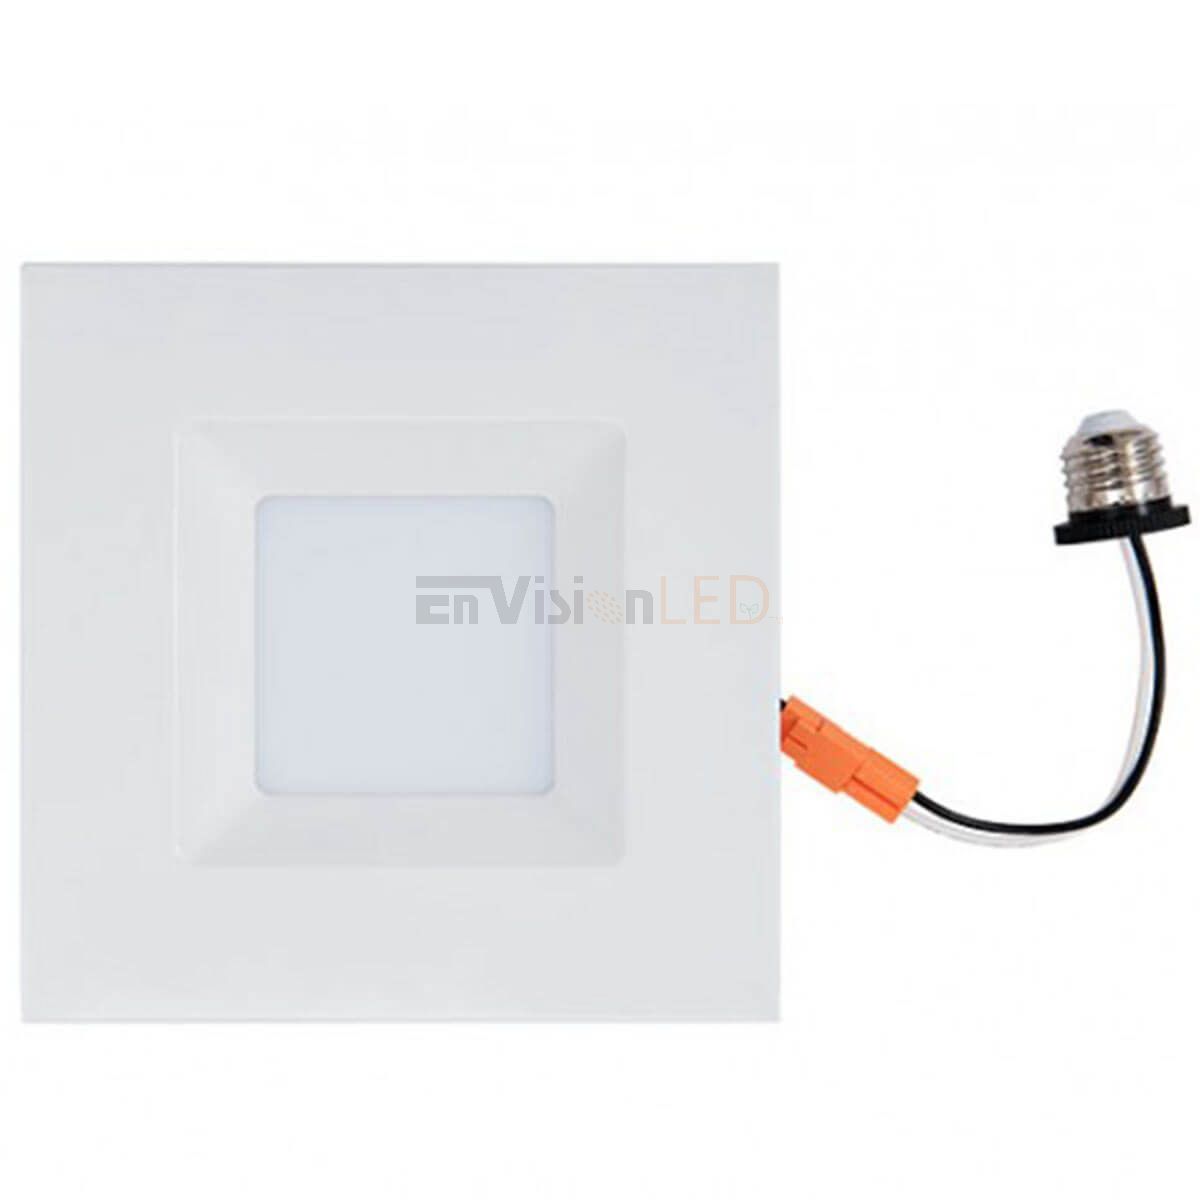 Envision 6" LED 15W Square Downlight Retrofit - Dimmable, 5CCT - Sonic Electric